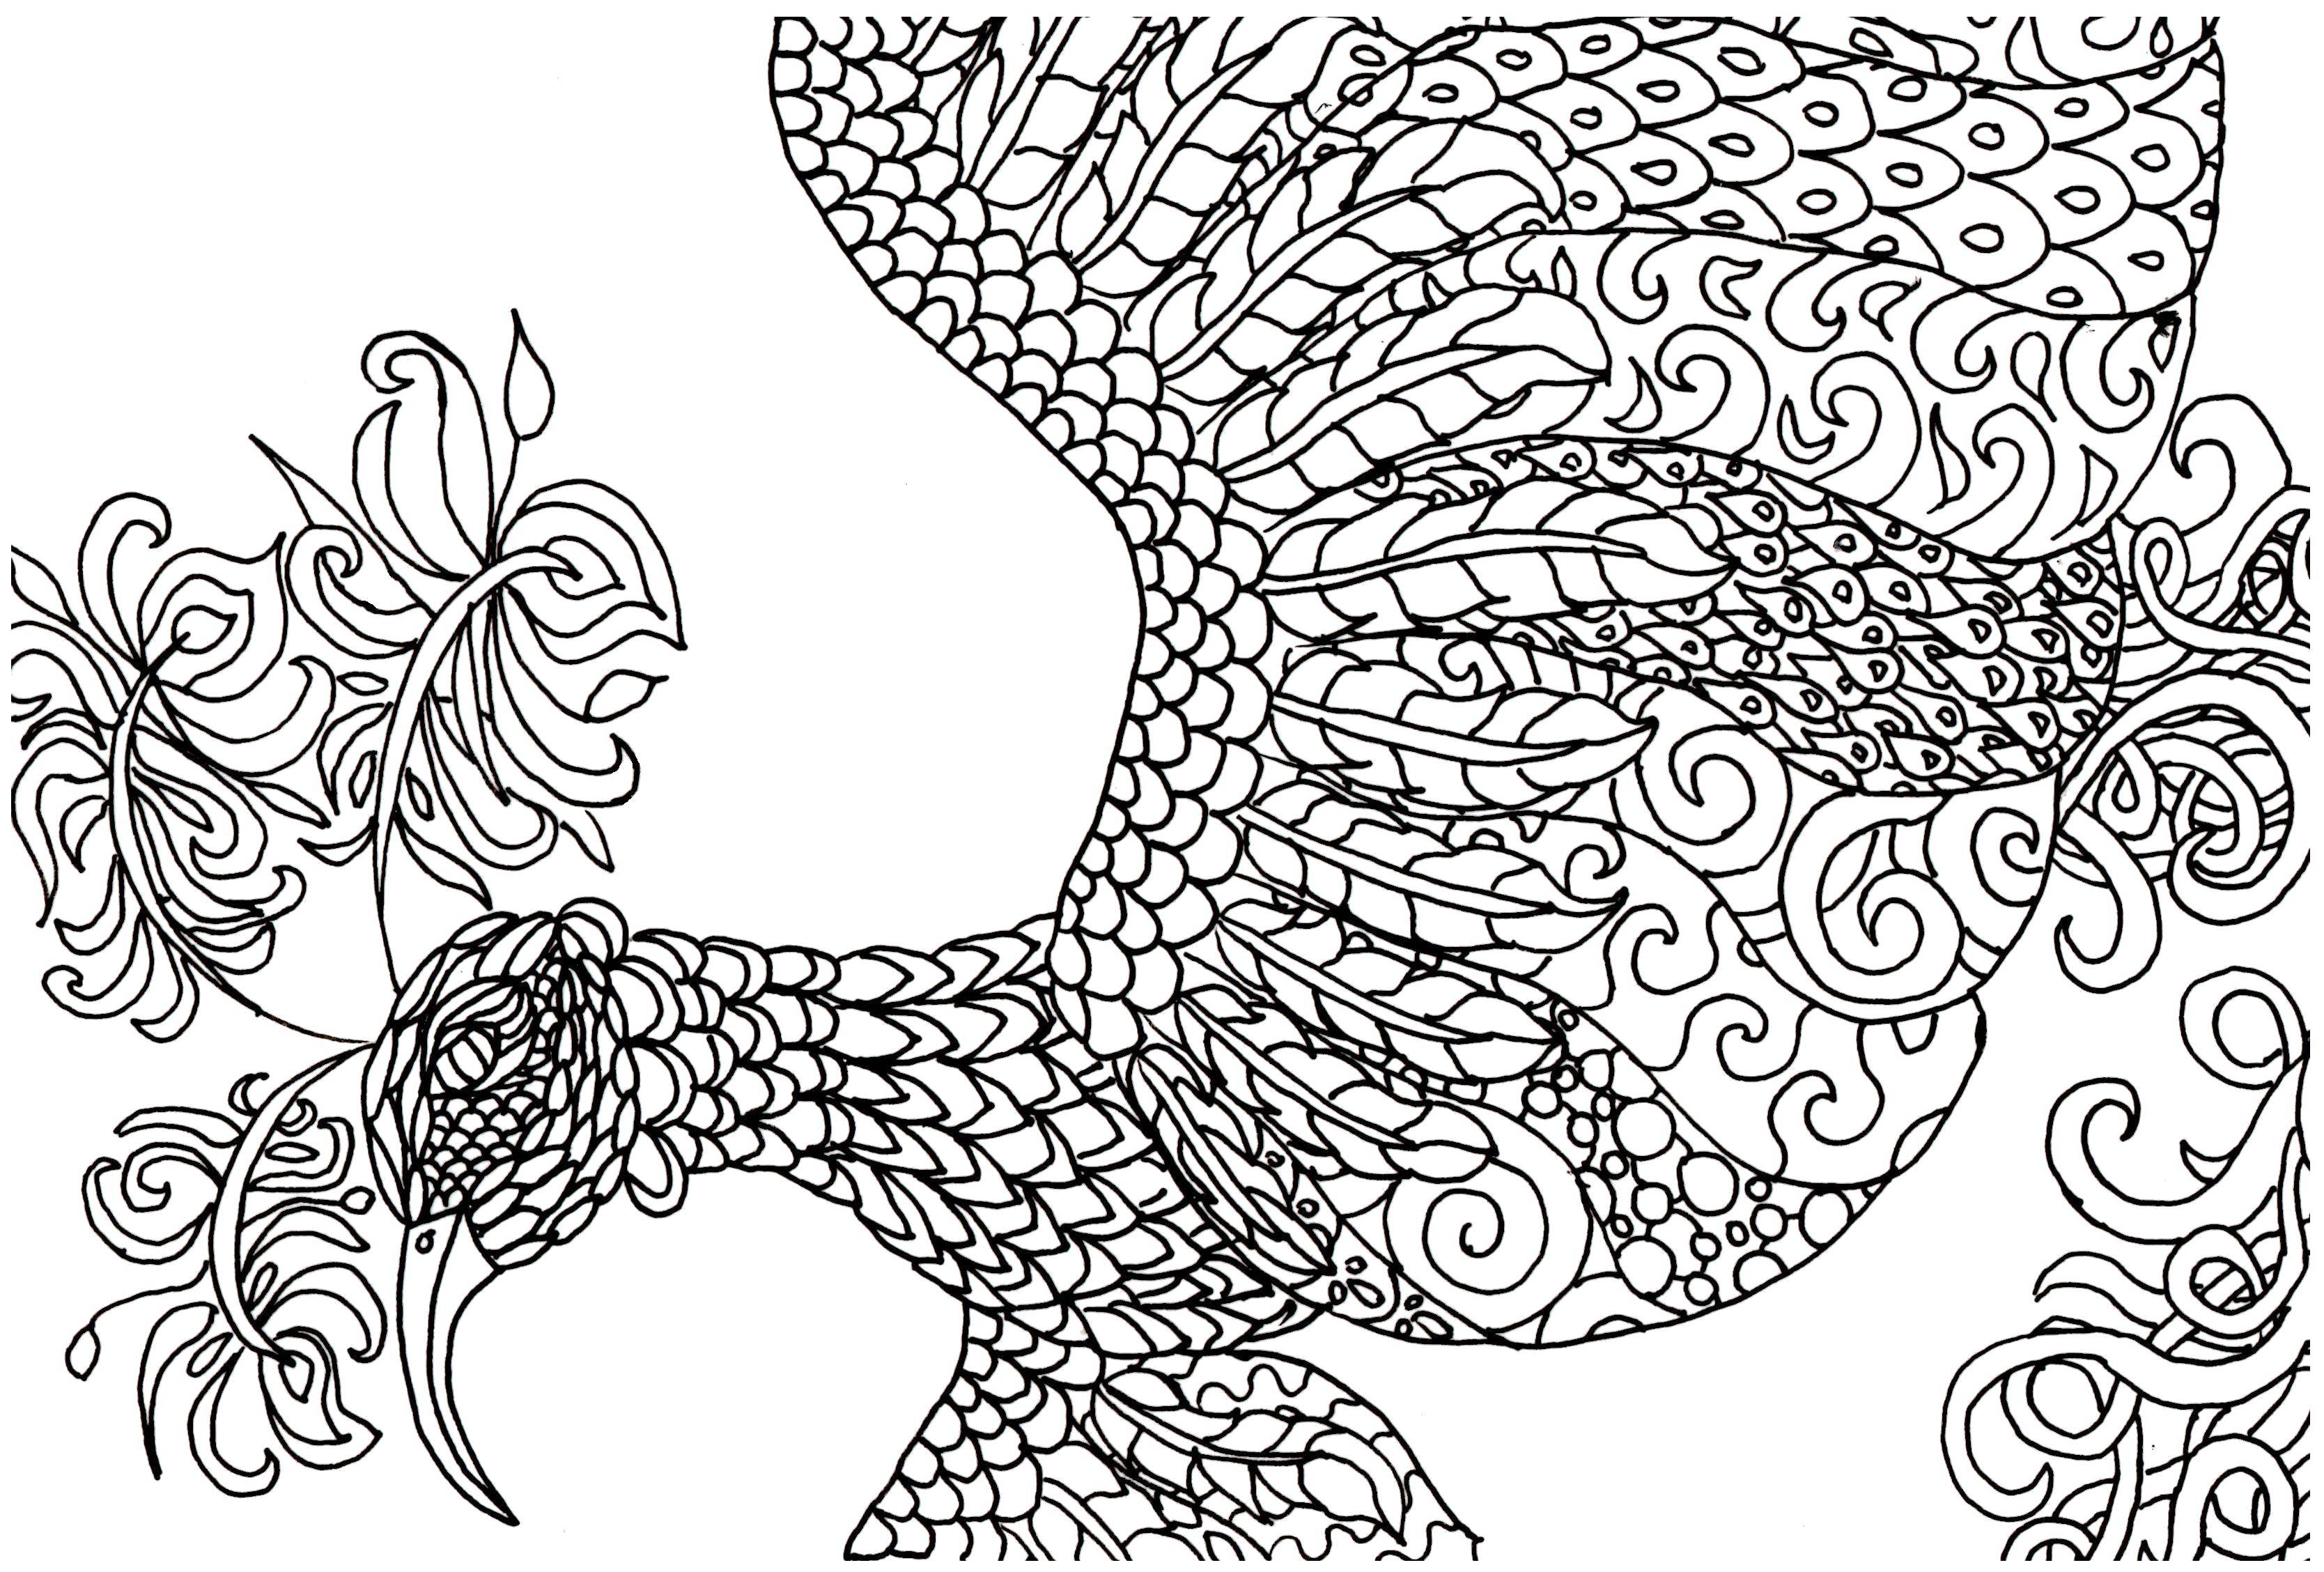 Coloring Fabulous peacock patterns. Category patterns. Tags:  Patterns, birds, peacock.